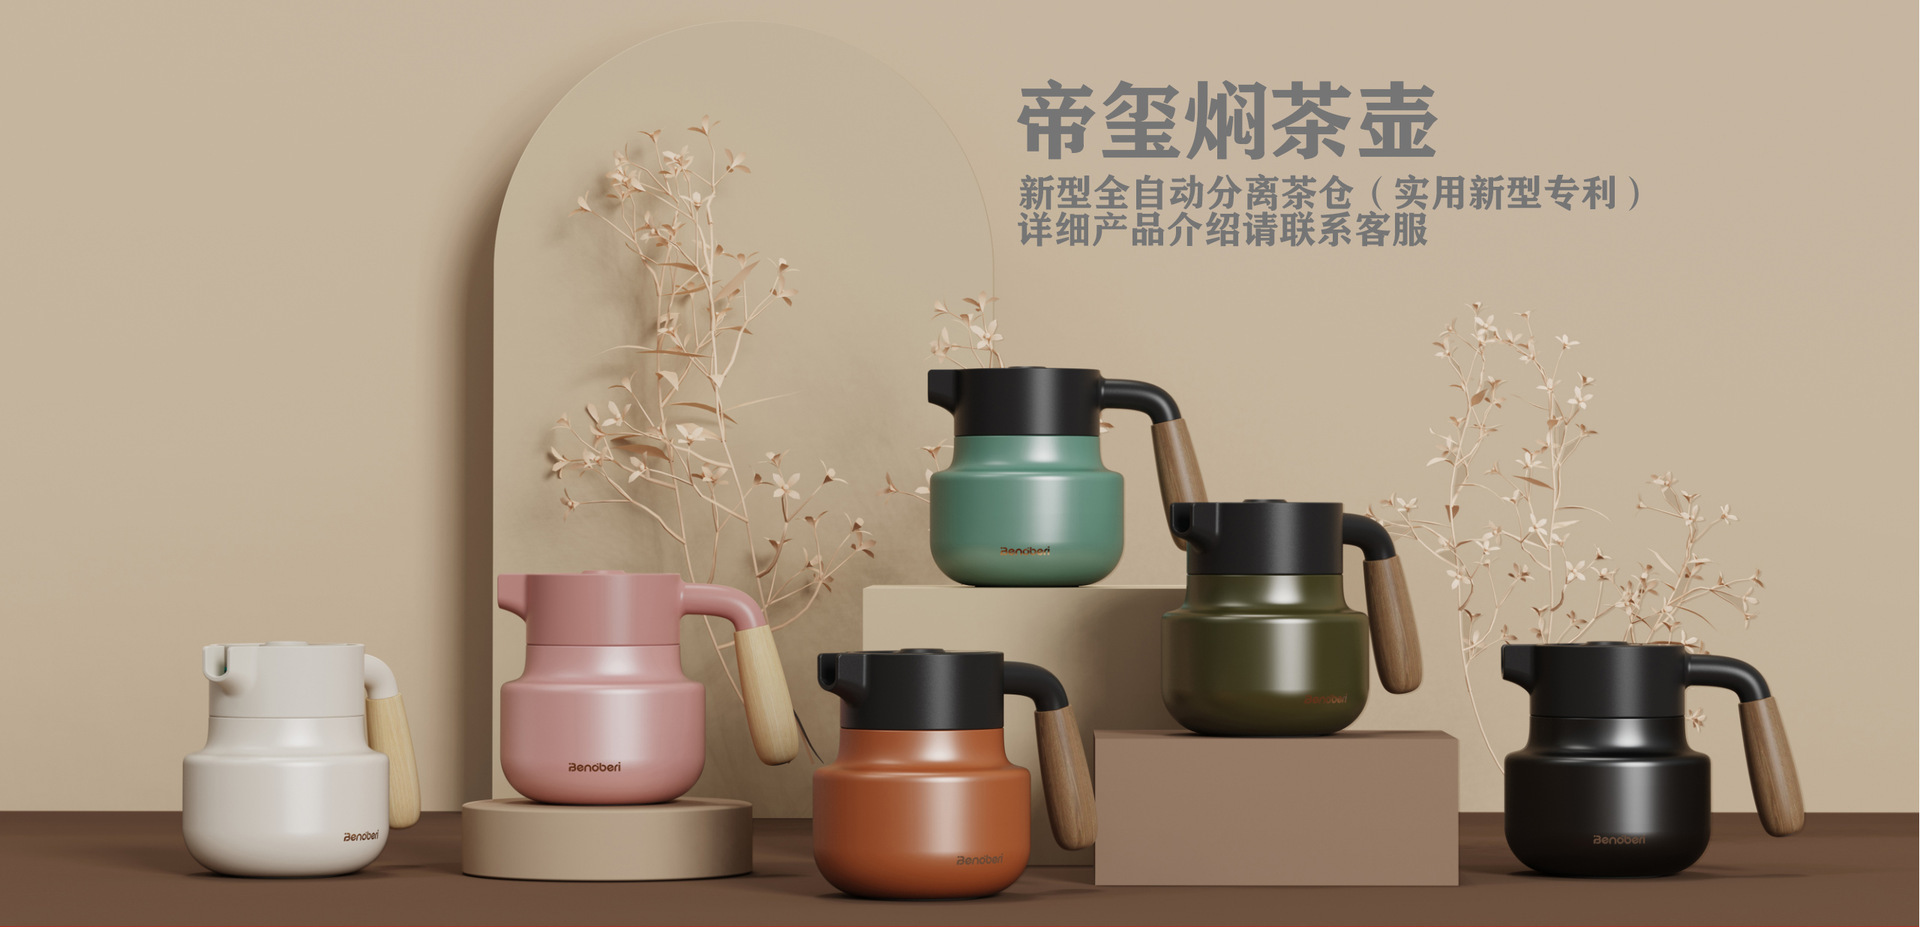 316 Material Household Thermal Pot